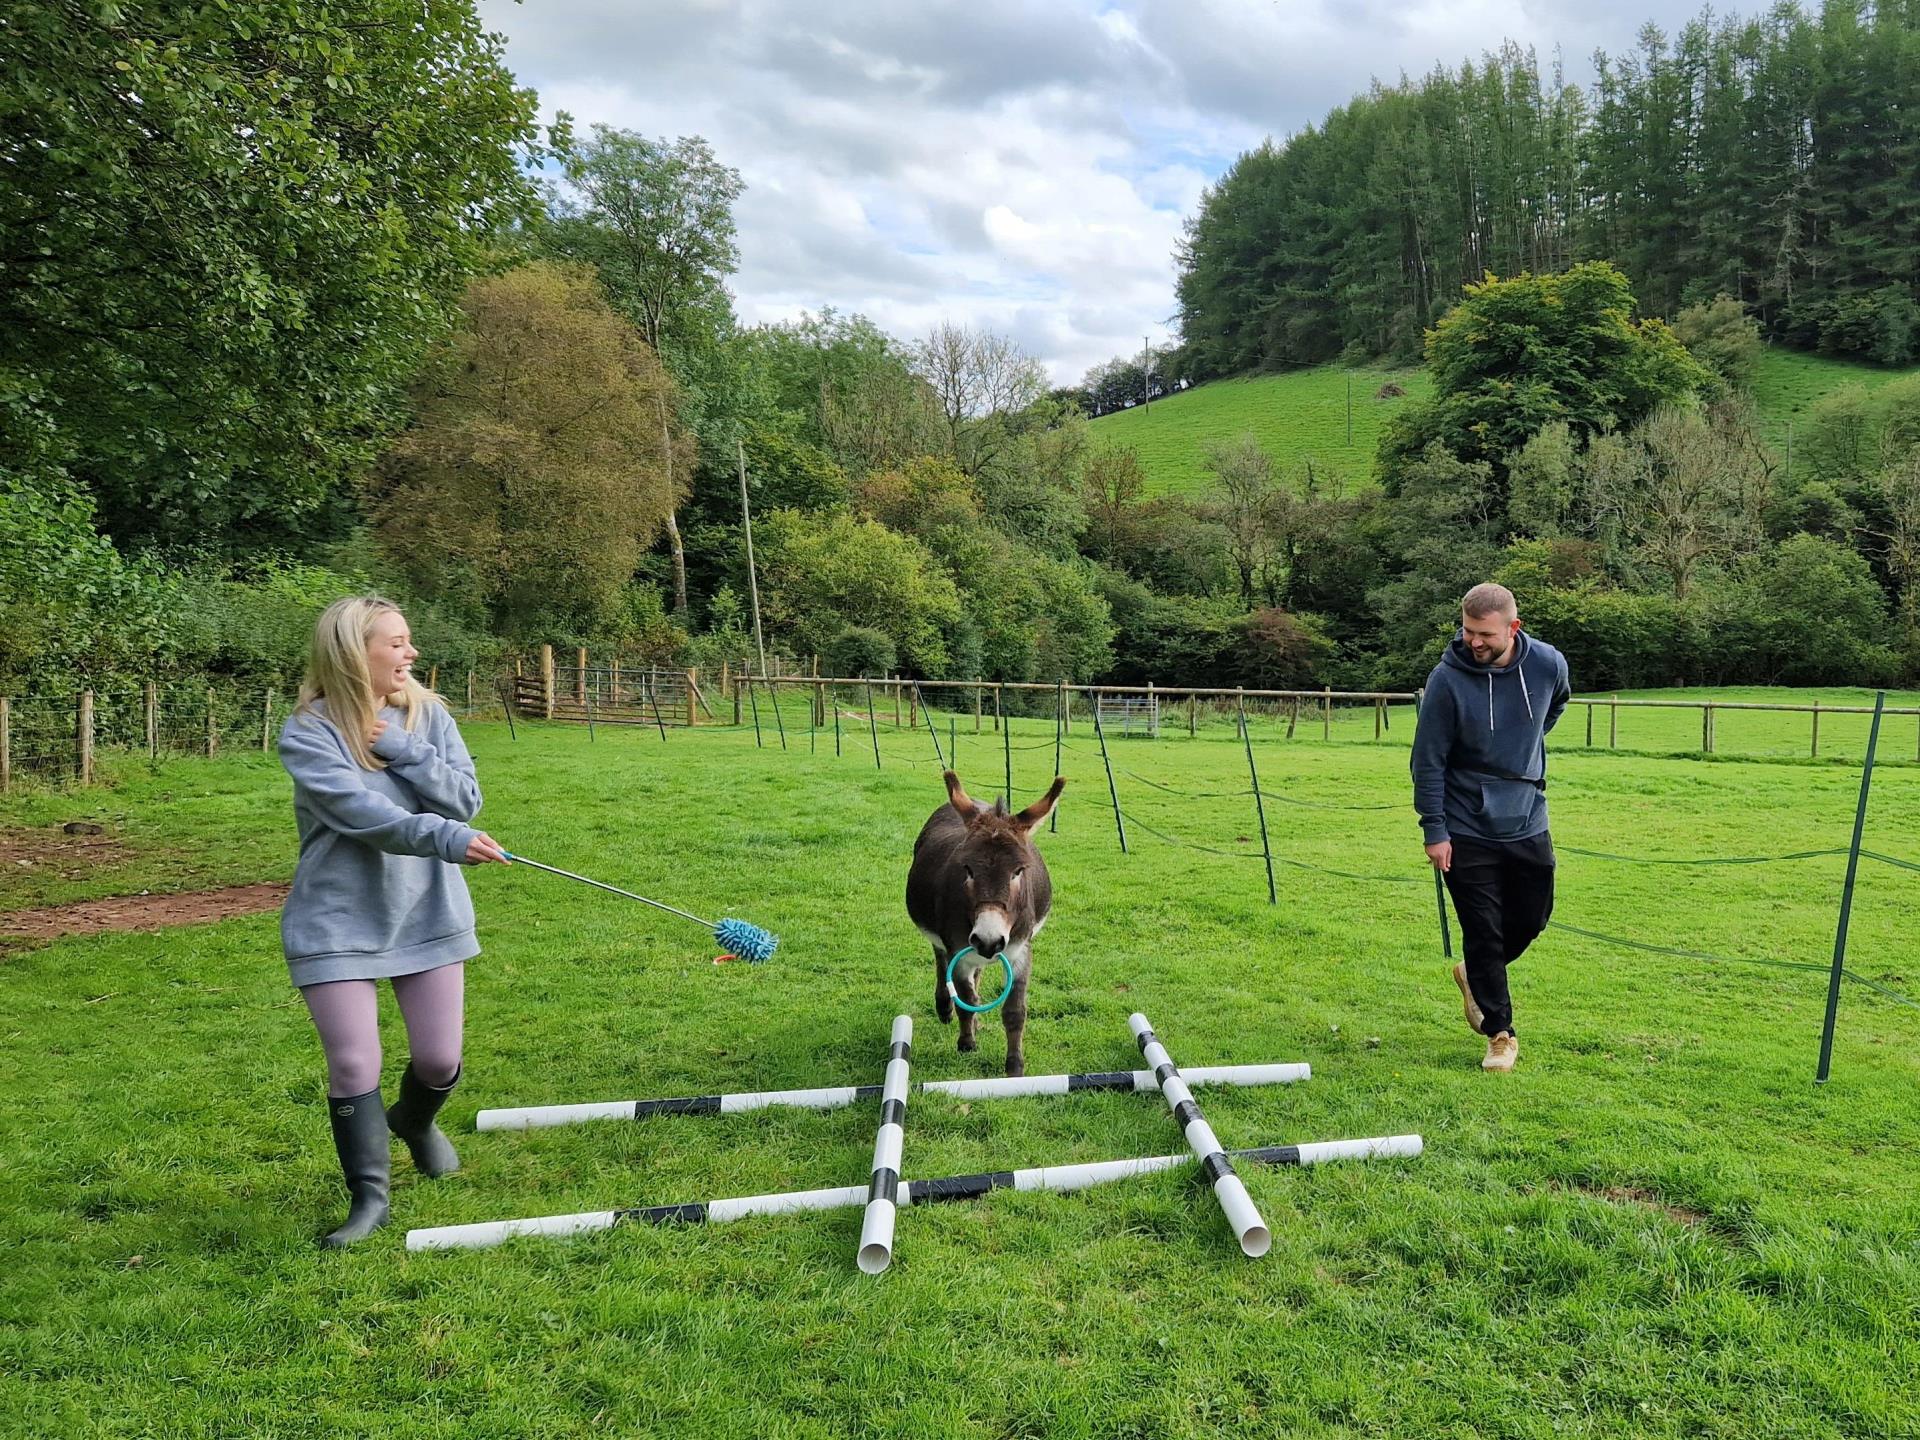 Play agility games with mini donkeys